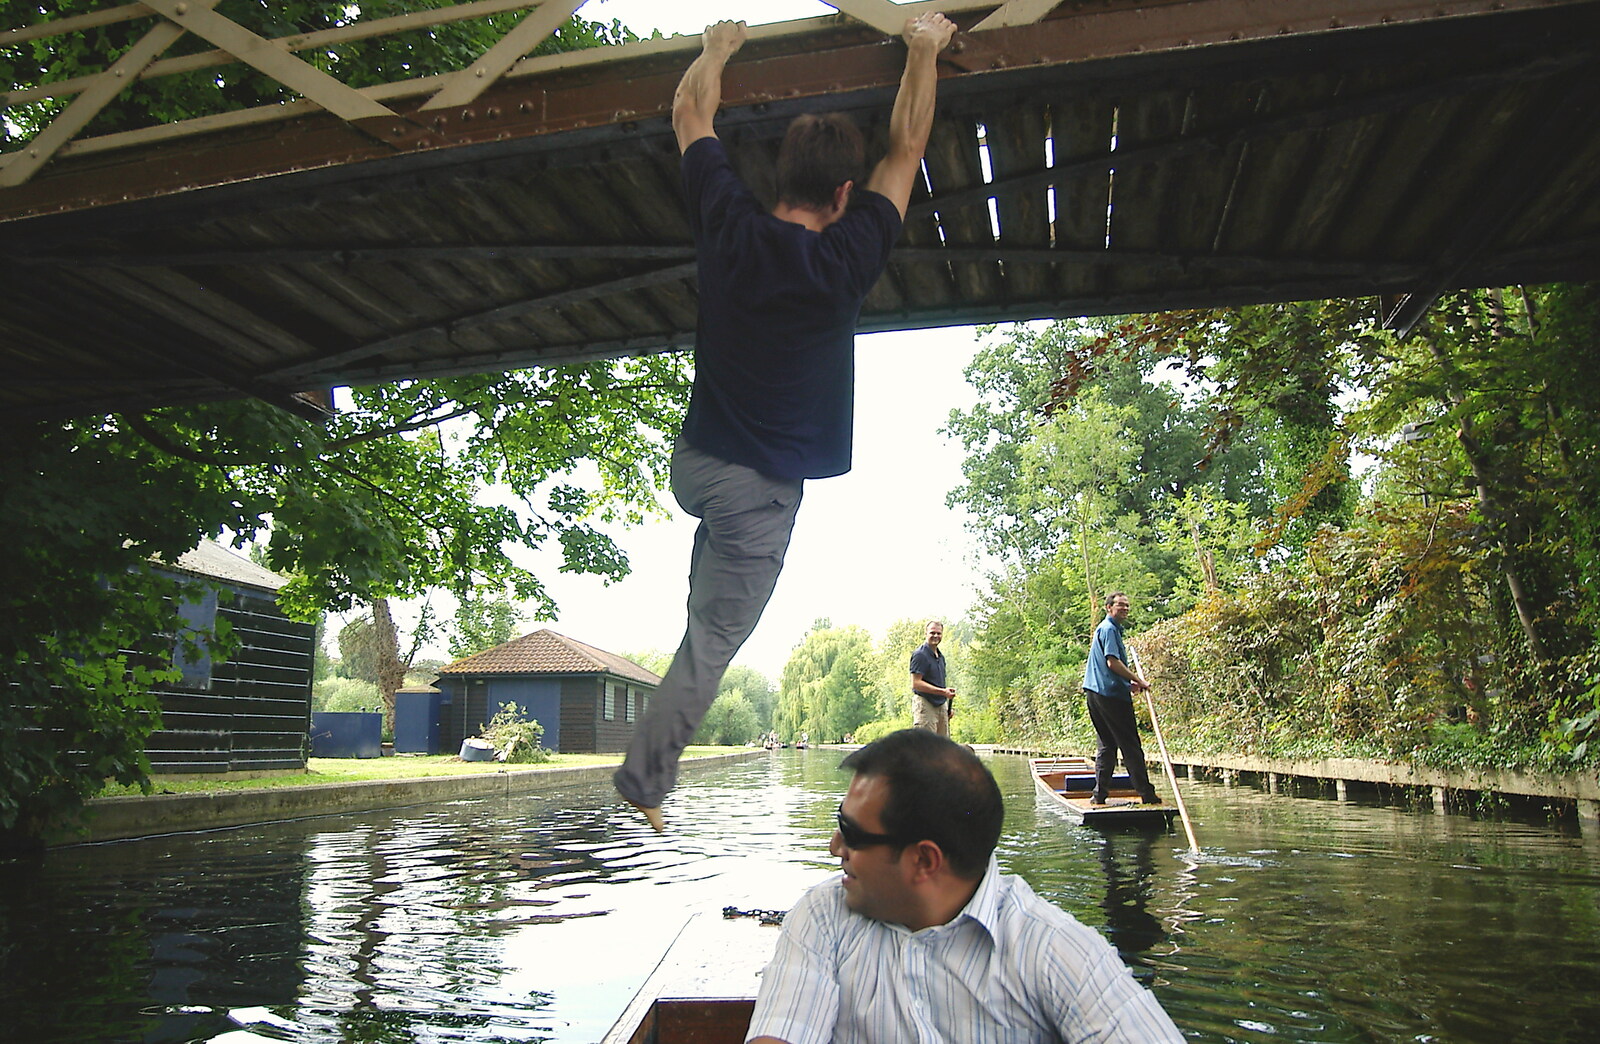 Ben leaps out of the punt to do the bridge-hop from Qualcomm goes Punting on the Cam, Grantchester Meadows, Cambridge - 18th August 2005